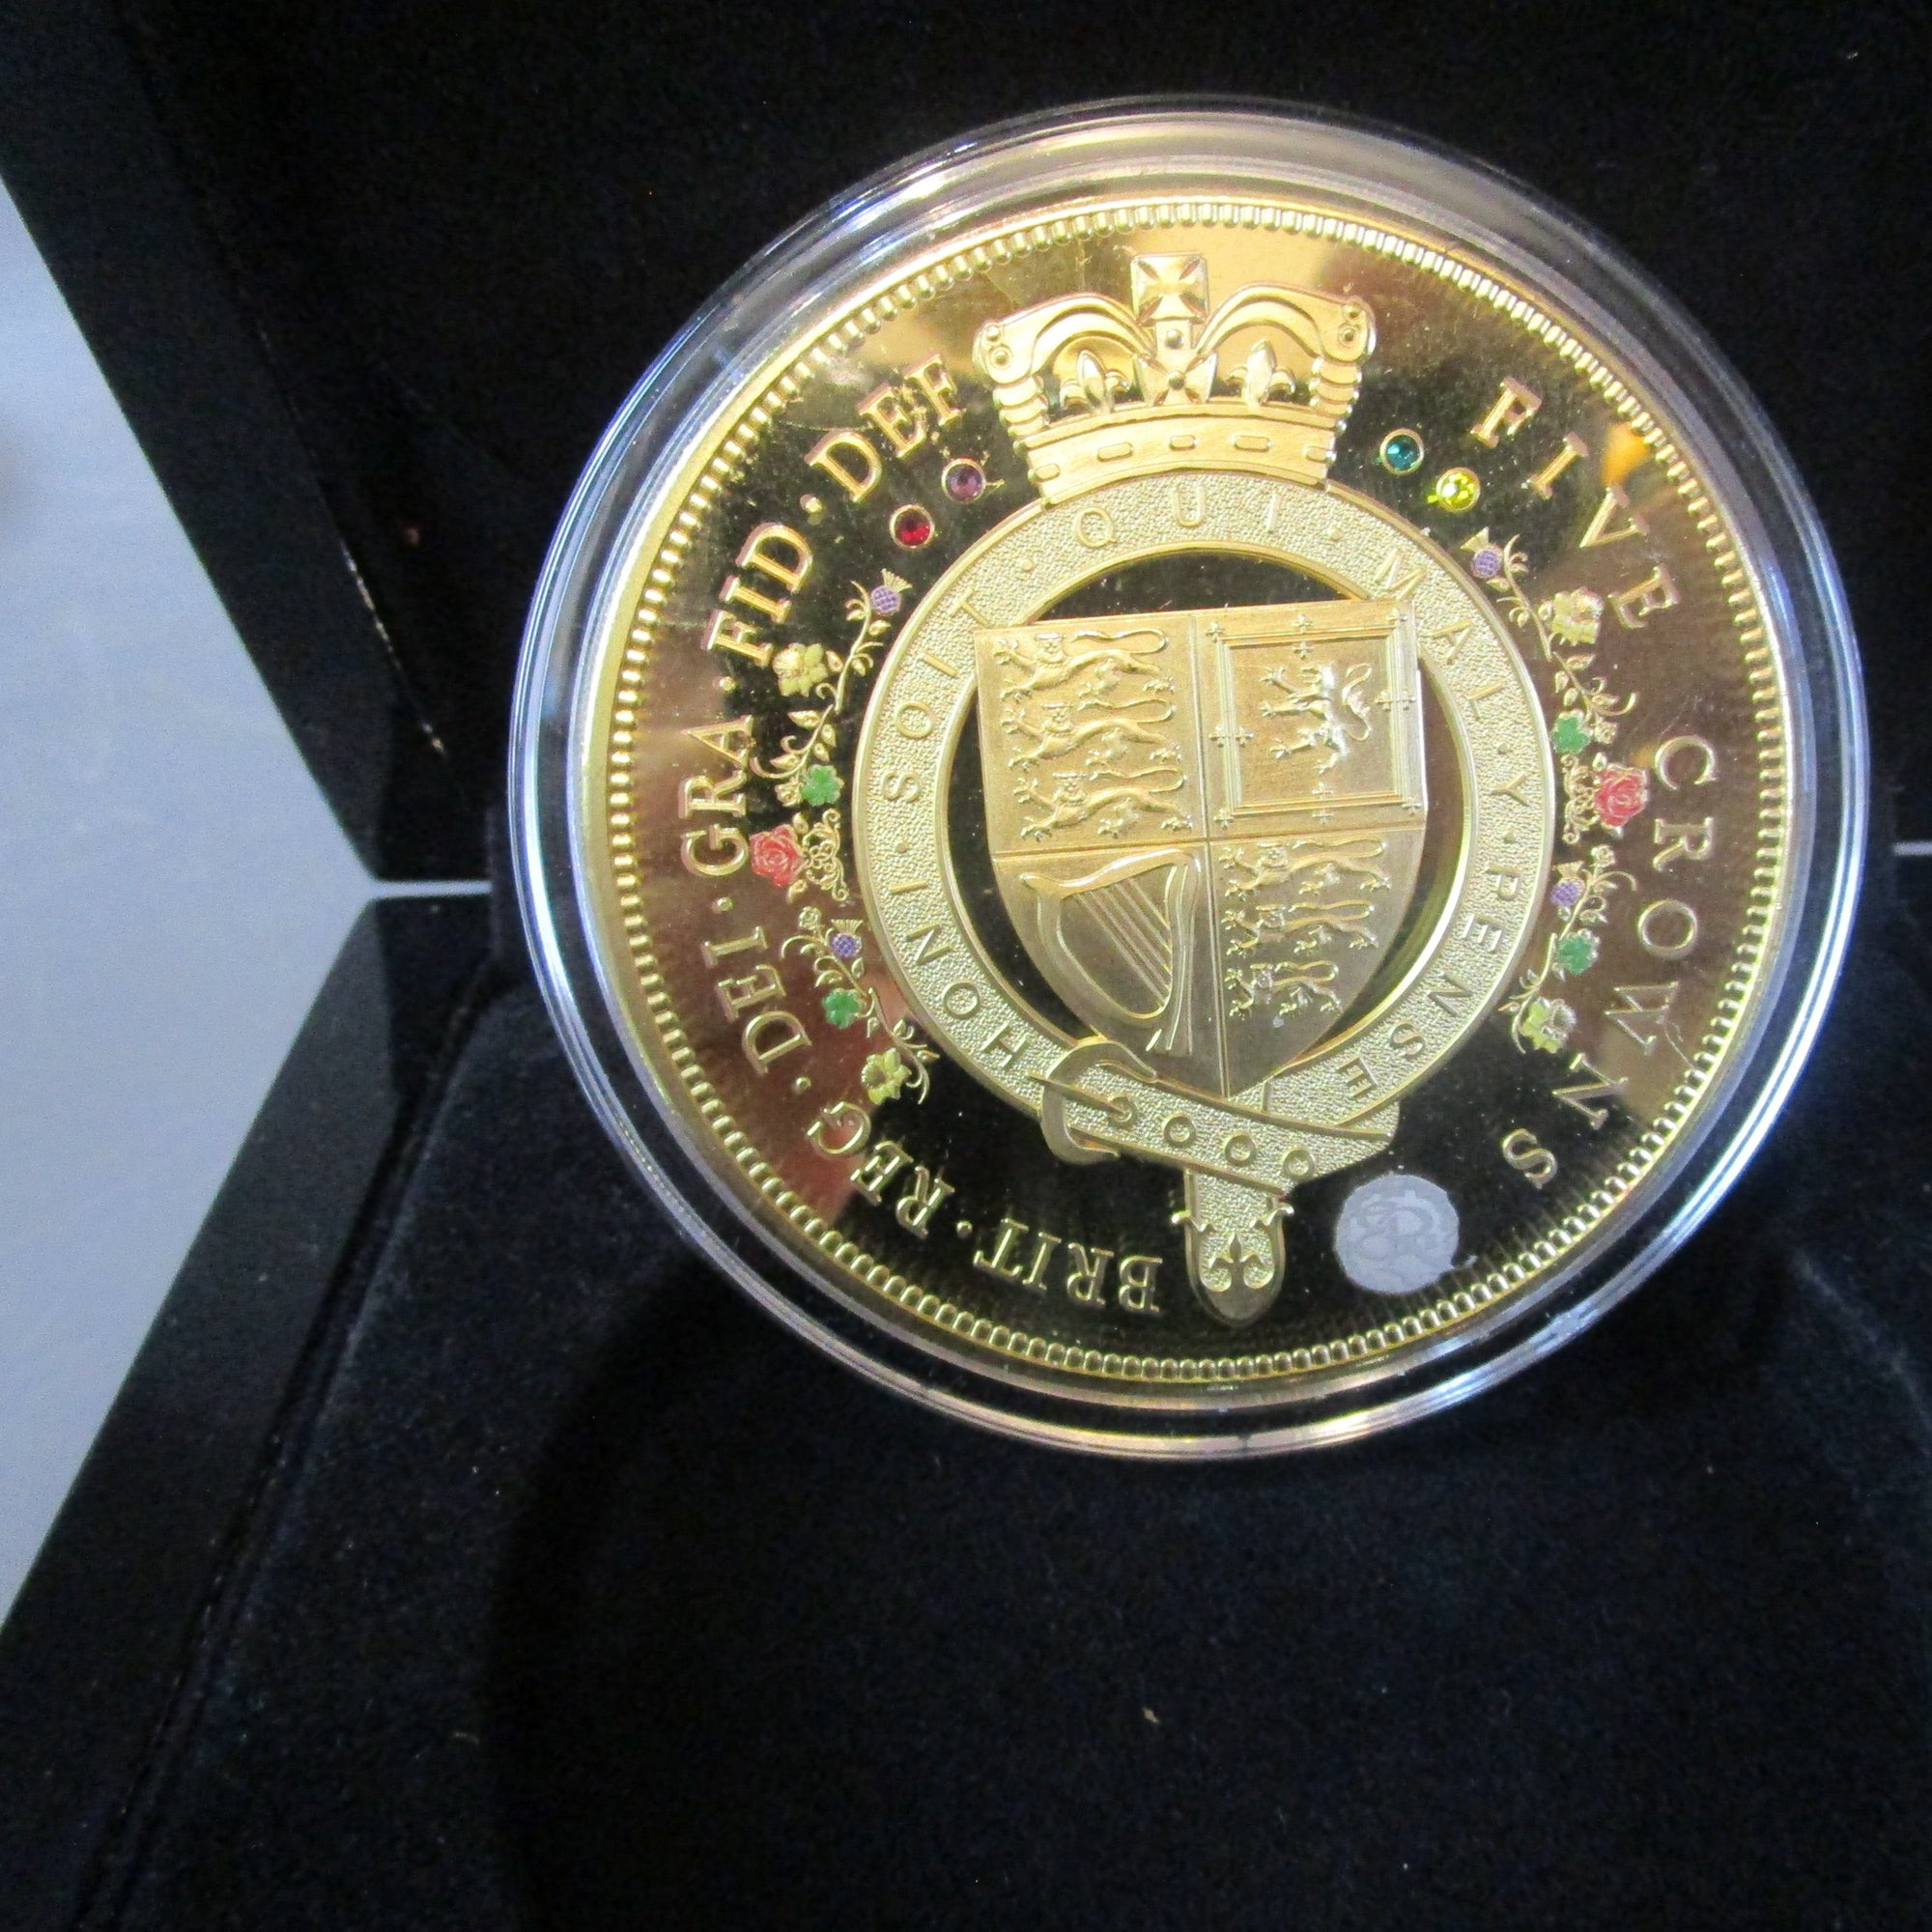 Gold Gilt Proof Five Crowns Bejewelled coin Boxed Vintage dated 2014